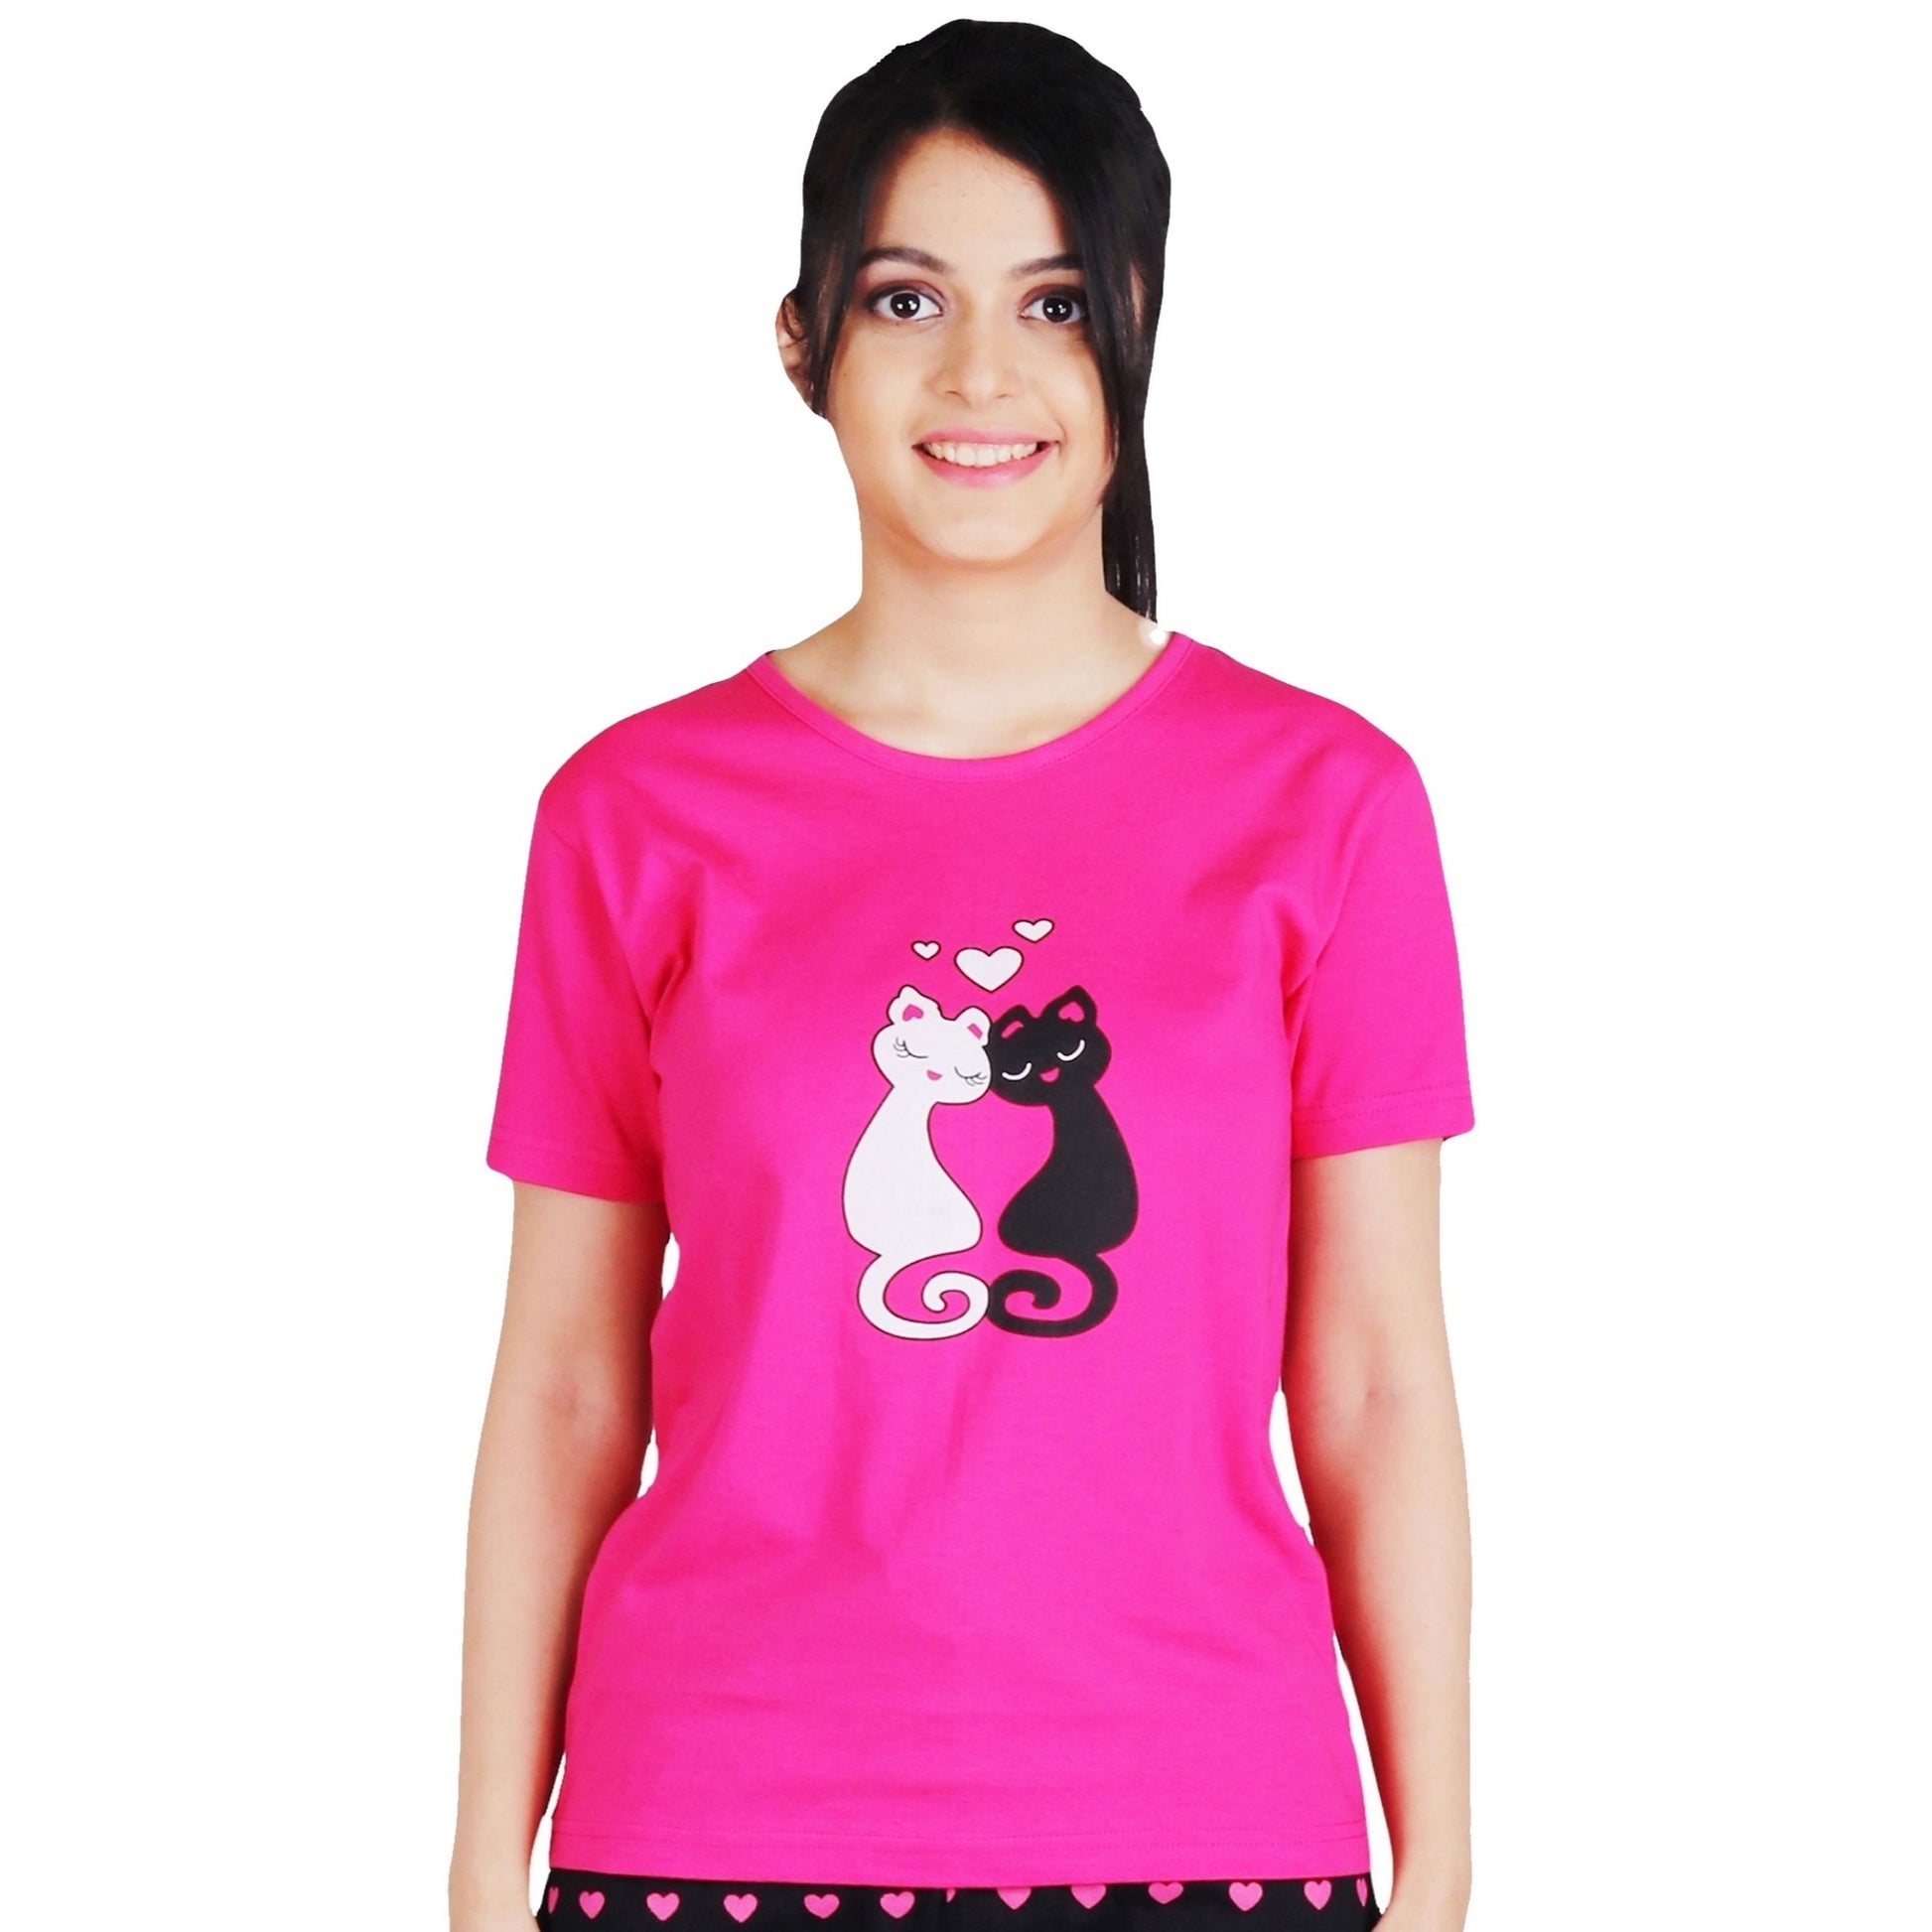 cotton pink color  round neck and short sleeve t shirt with white and black cat image printed